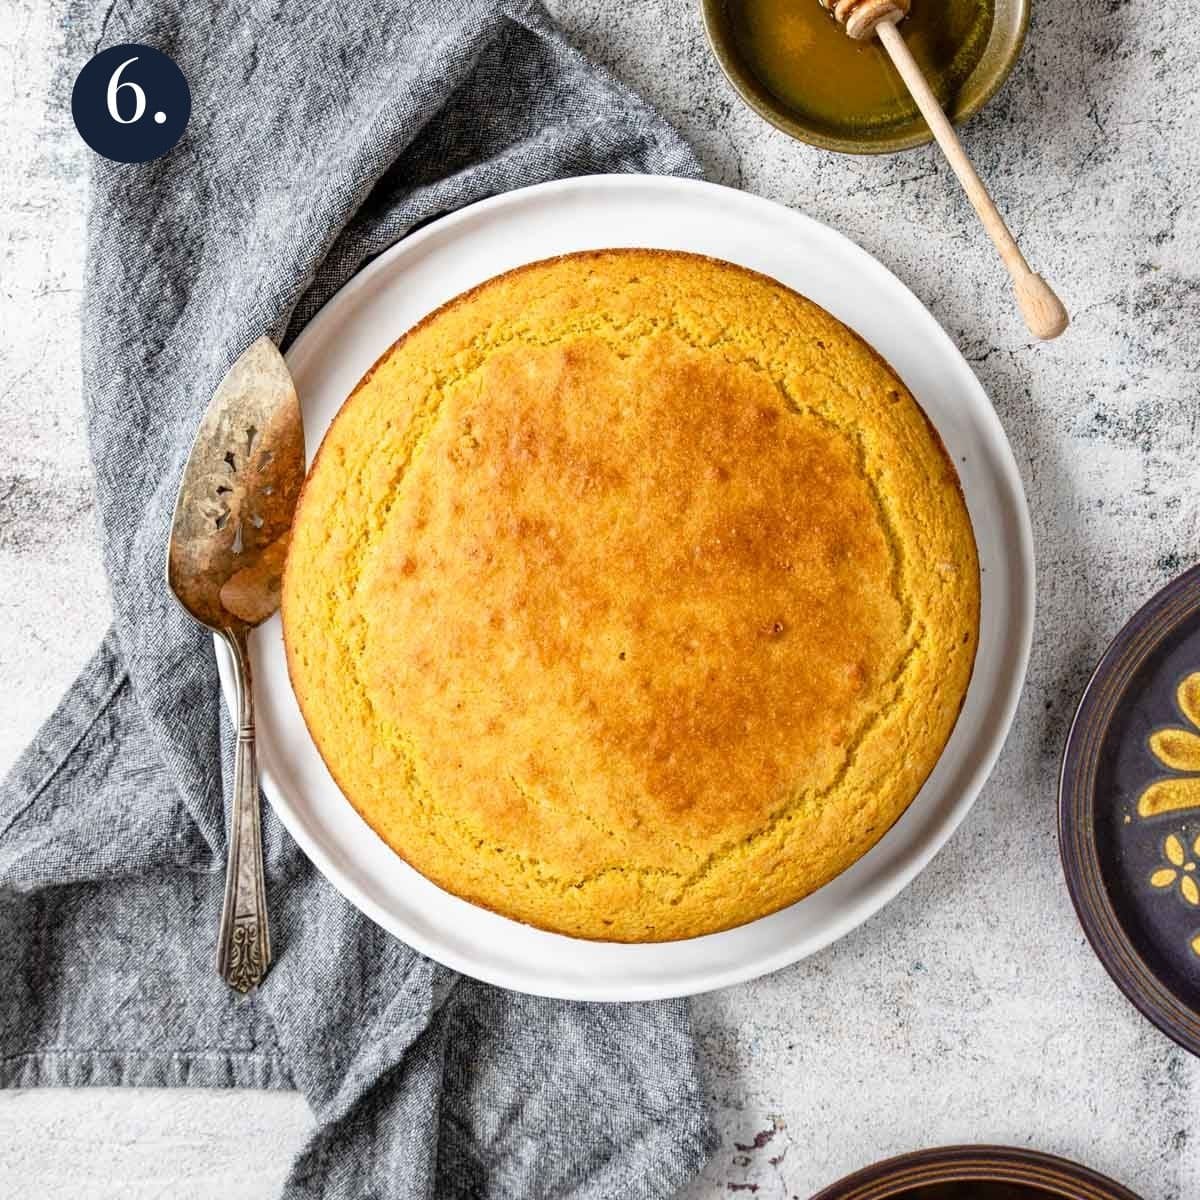 cornbread baked in a 9 inch round pan